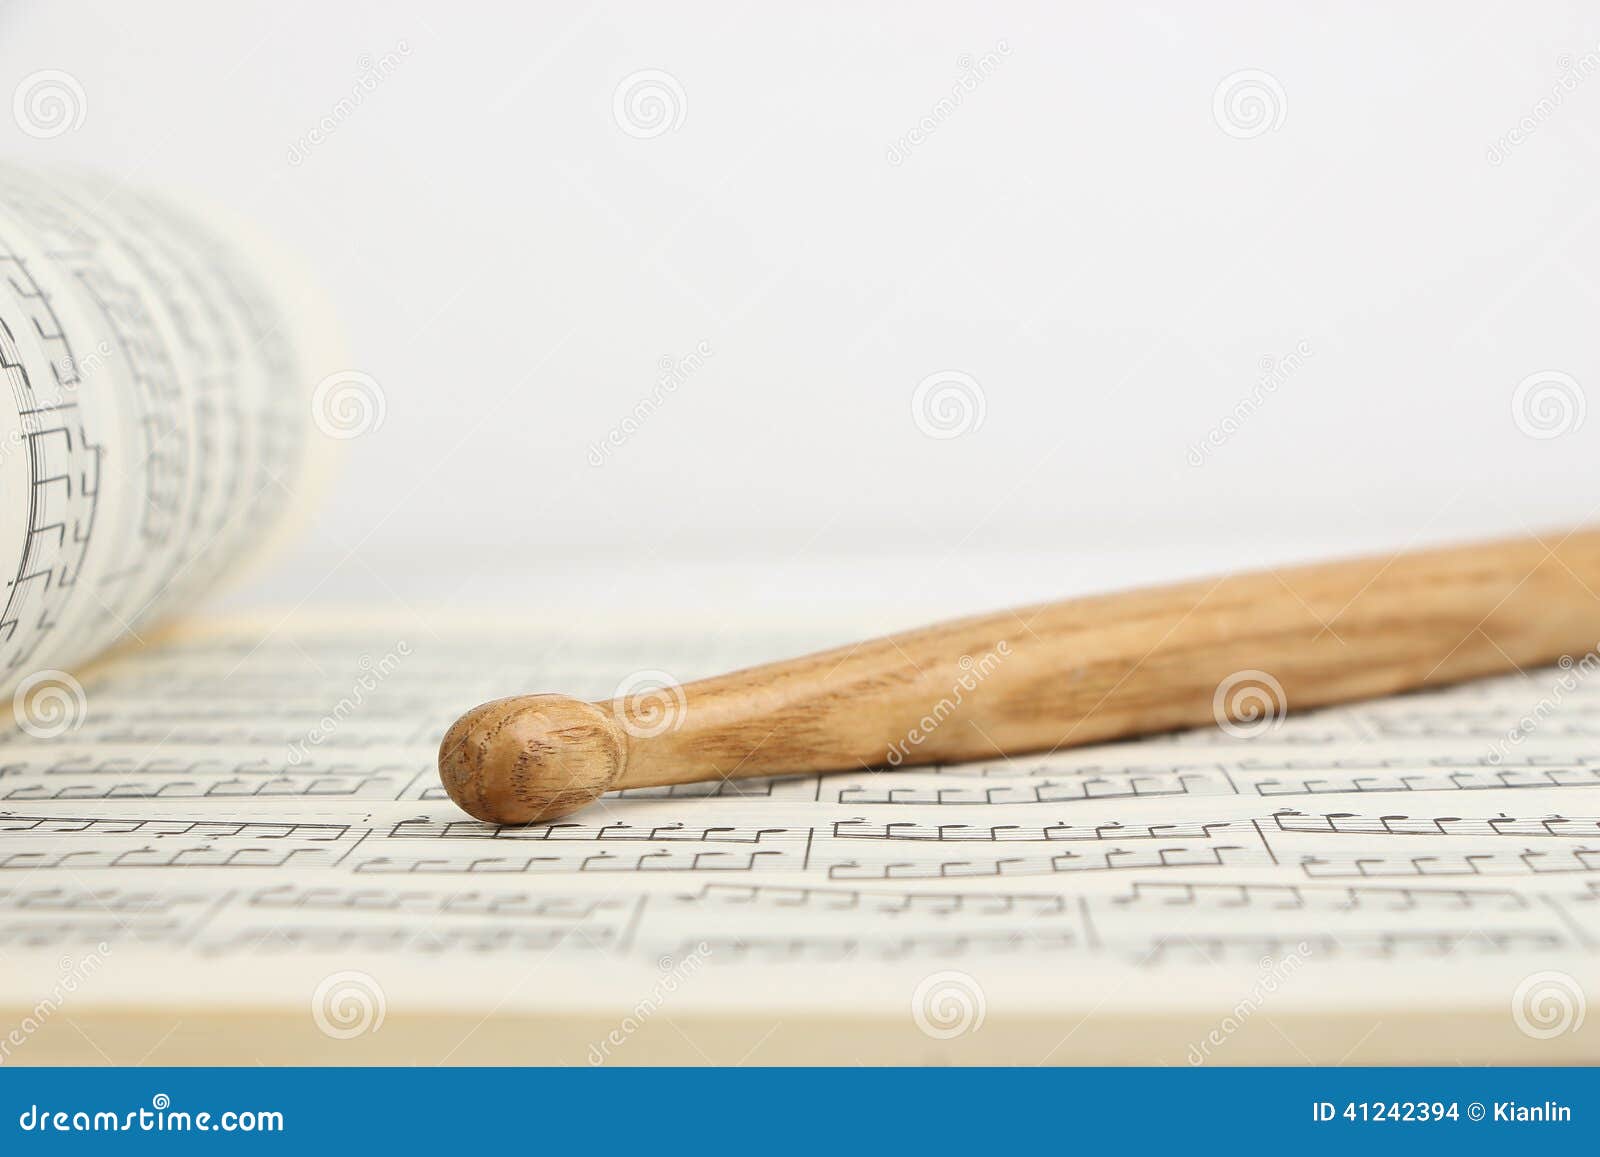 drumstick and music sheet